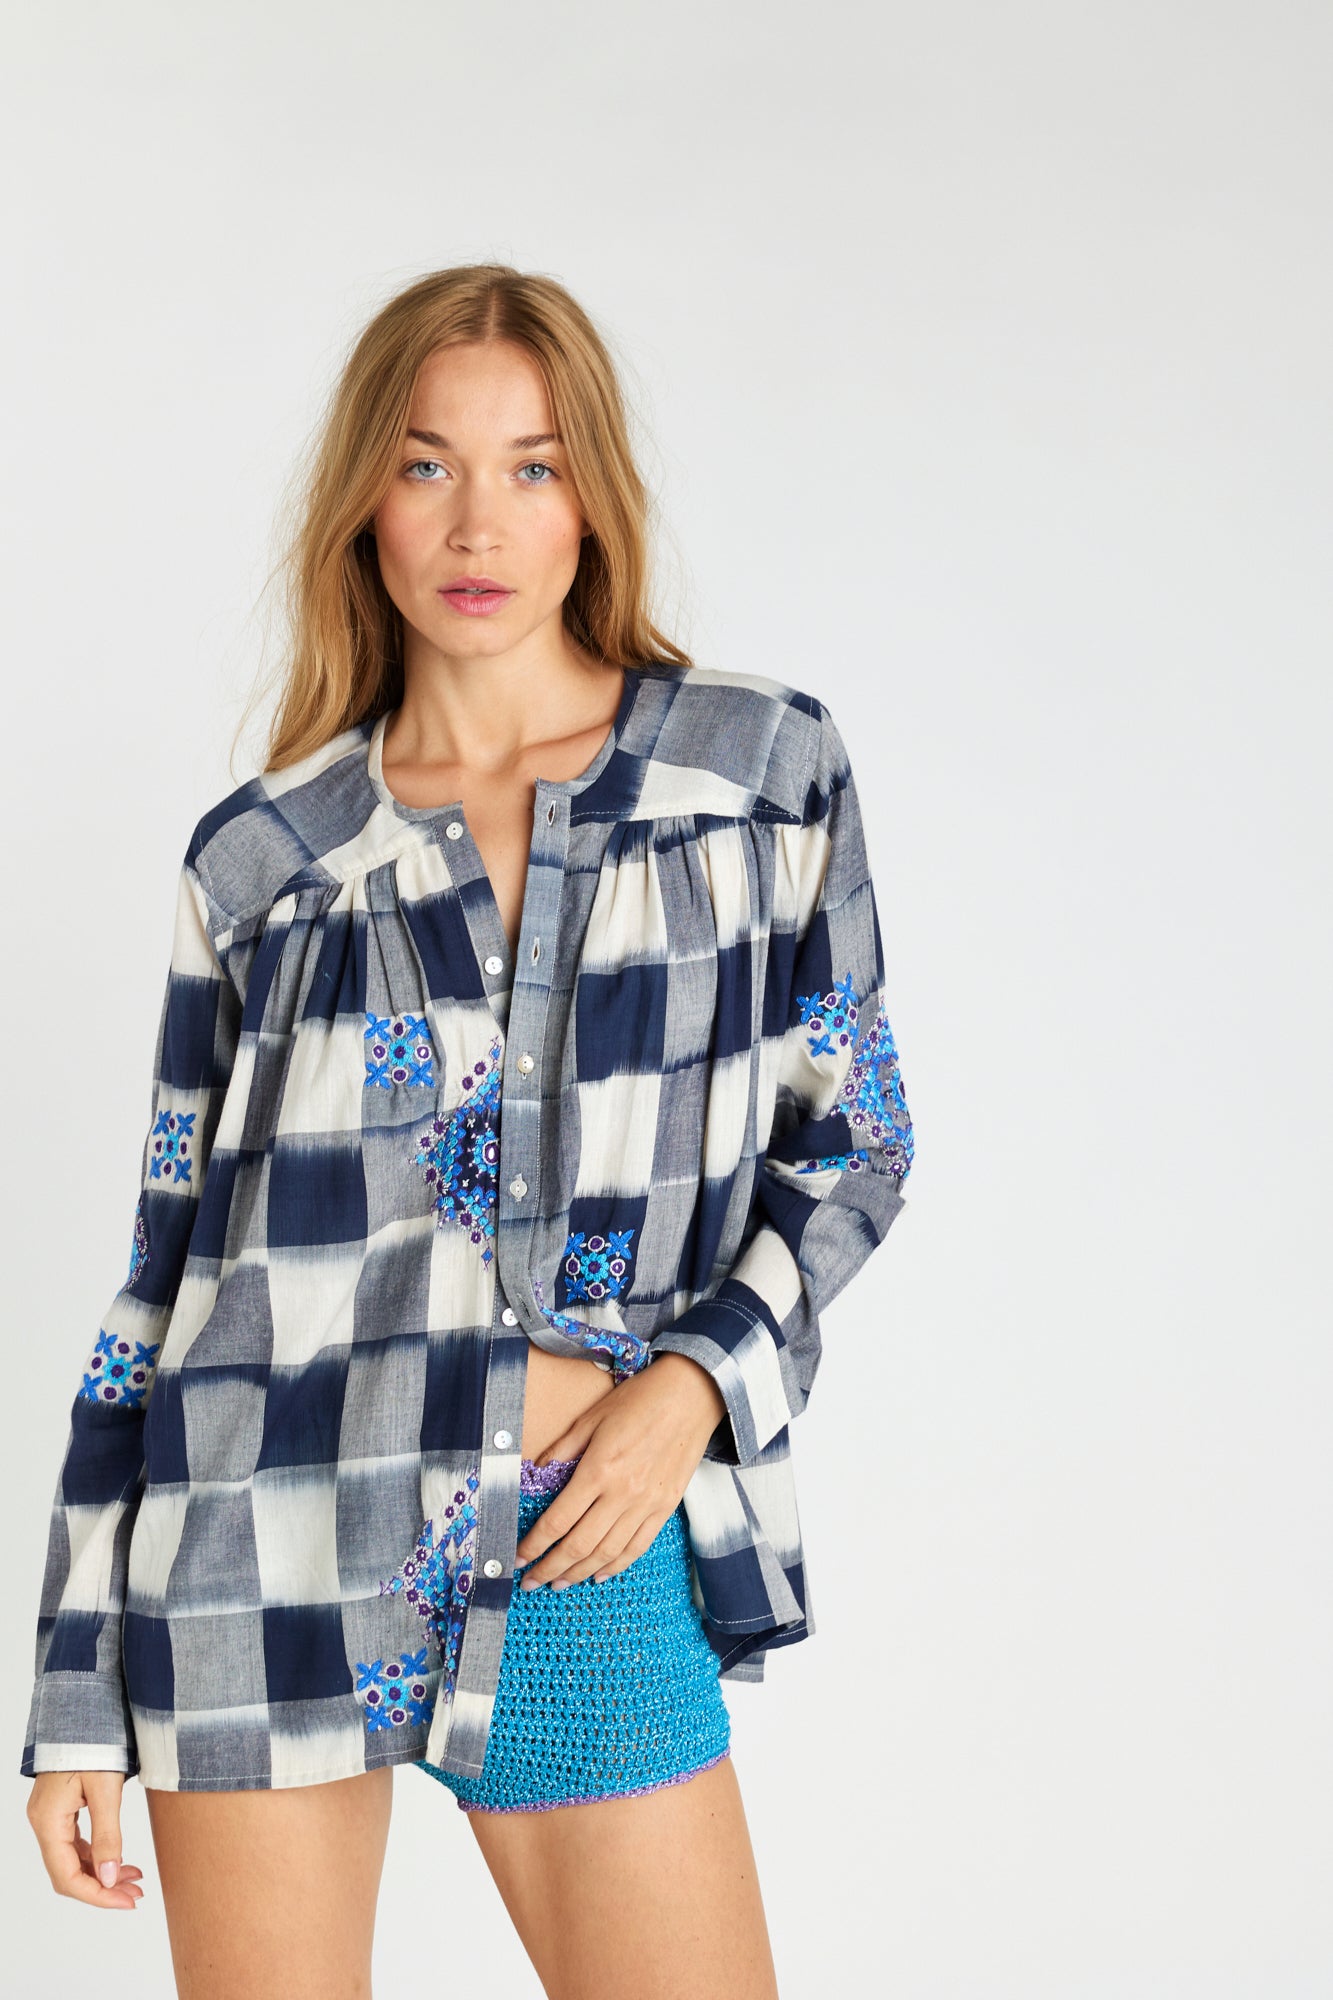 Inji Ikat Embroidered Indigo Tie and Dye Checkered Blouse 